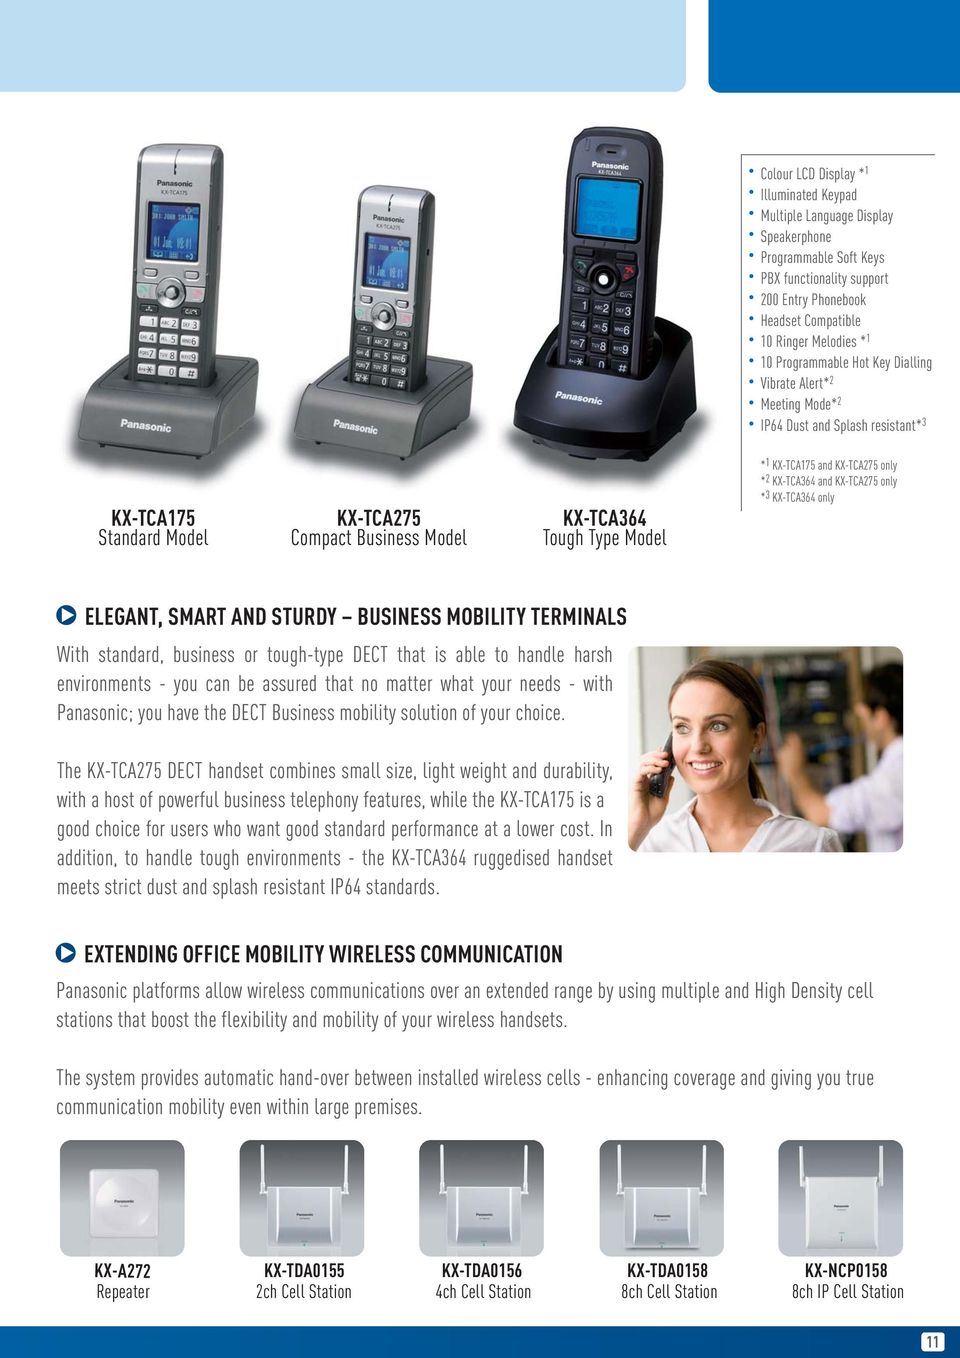 KX-TCA275 only * 2 KX-TCA364 and KX-TCA275 only * 3 KX-TCA364 only ELEGANT, SMART AND STURDY BUSINESS MOBILITY TERMINALS With standard, business or tough-type DECT that is able to handle harsh